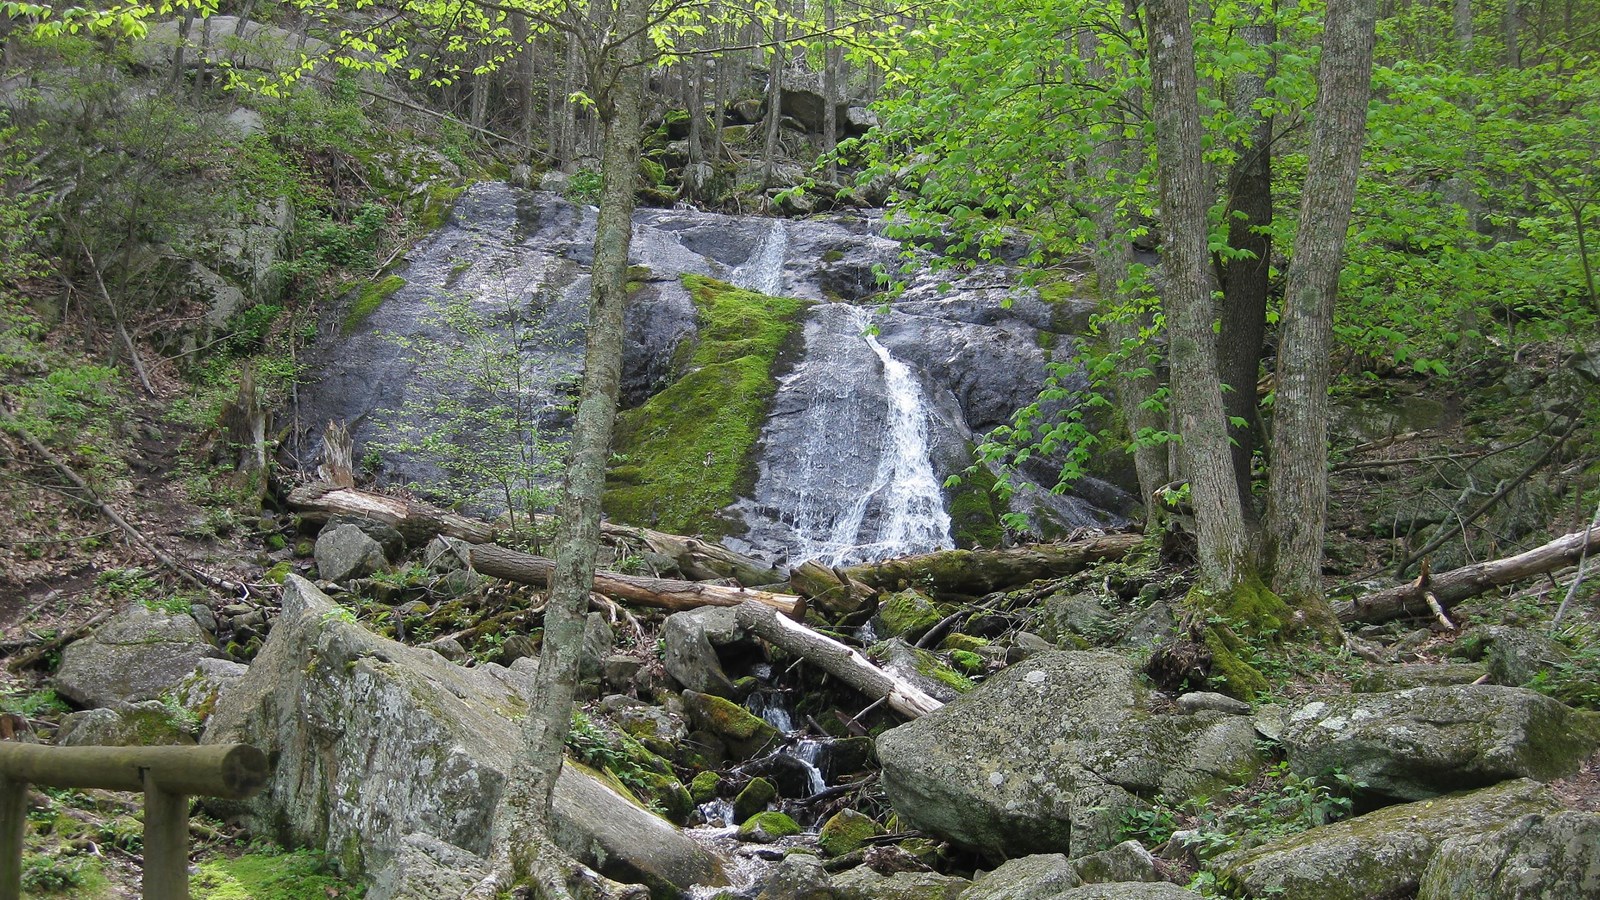 Water cascades over a rock outcropping in a lush, green forest